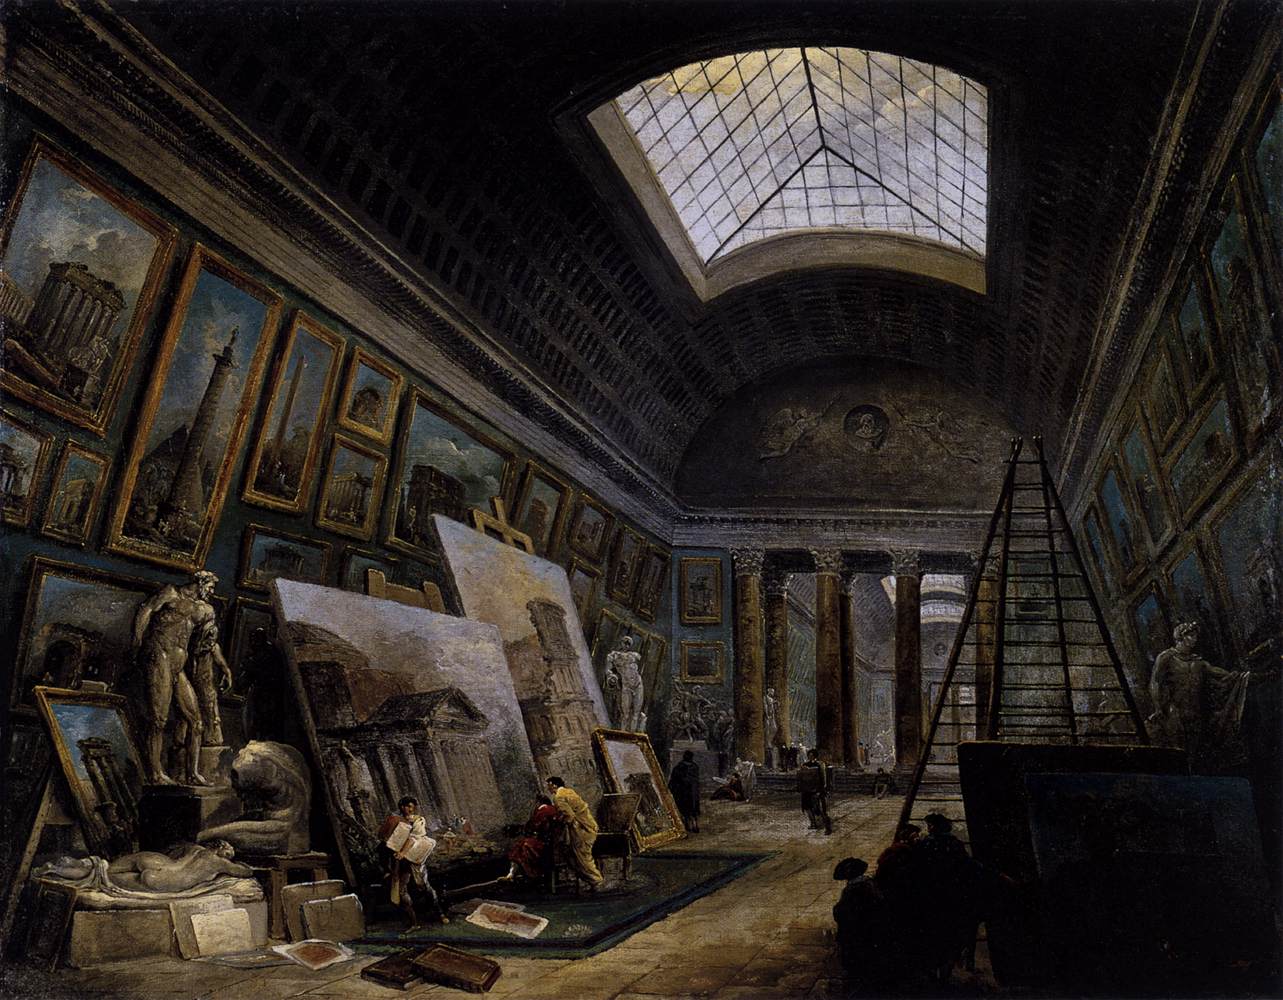 Imaginary View of The Grand Gallery in the Louvre